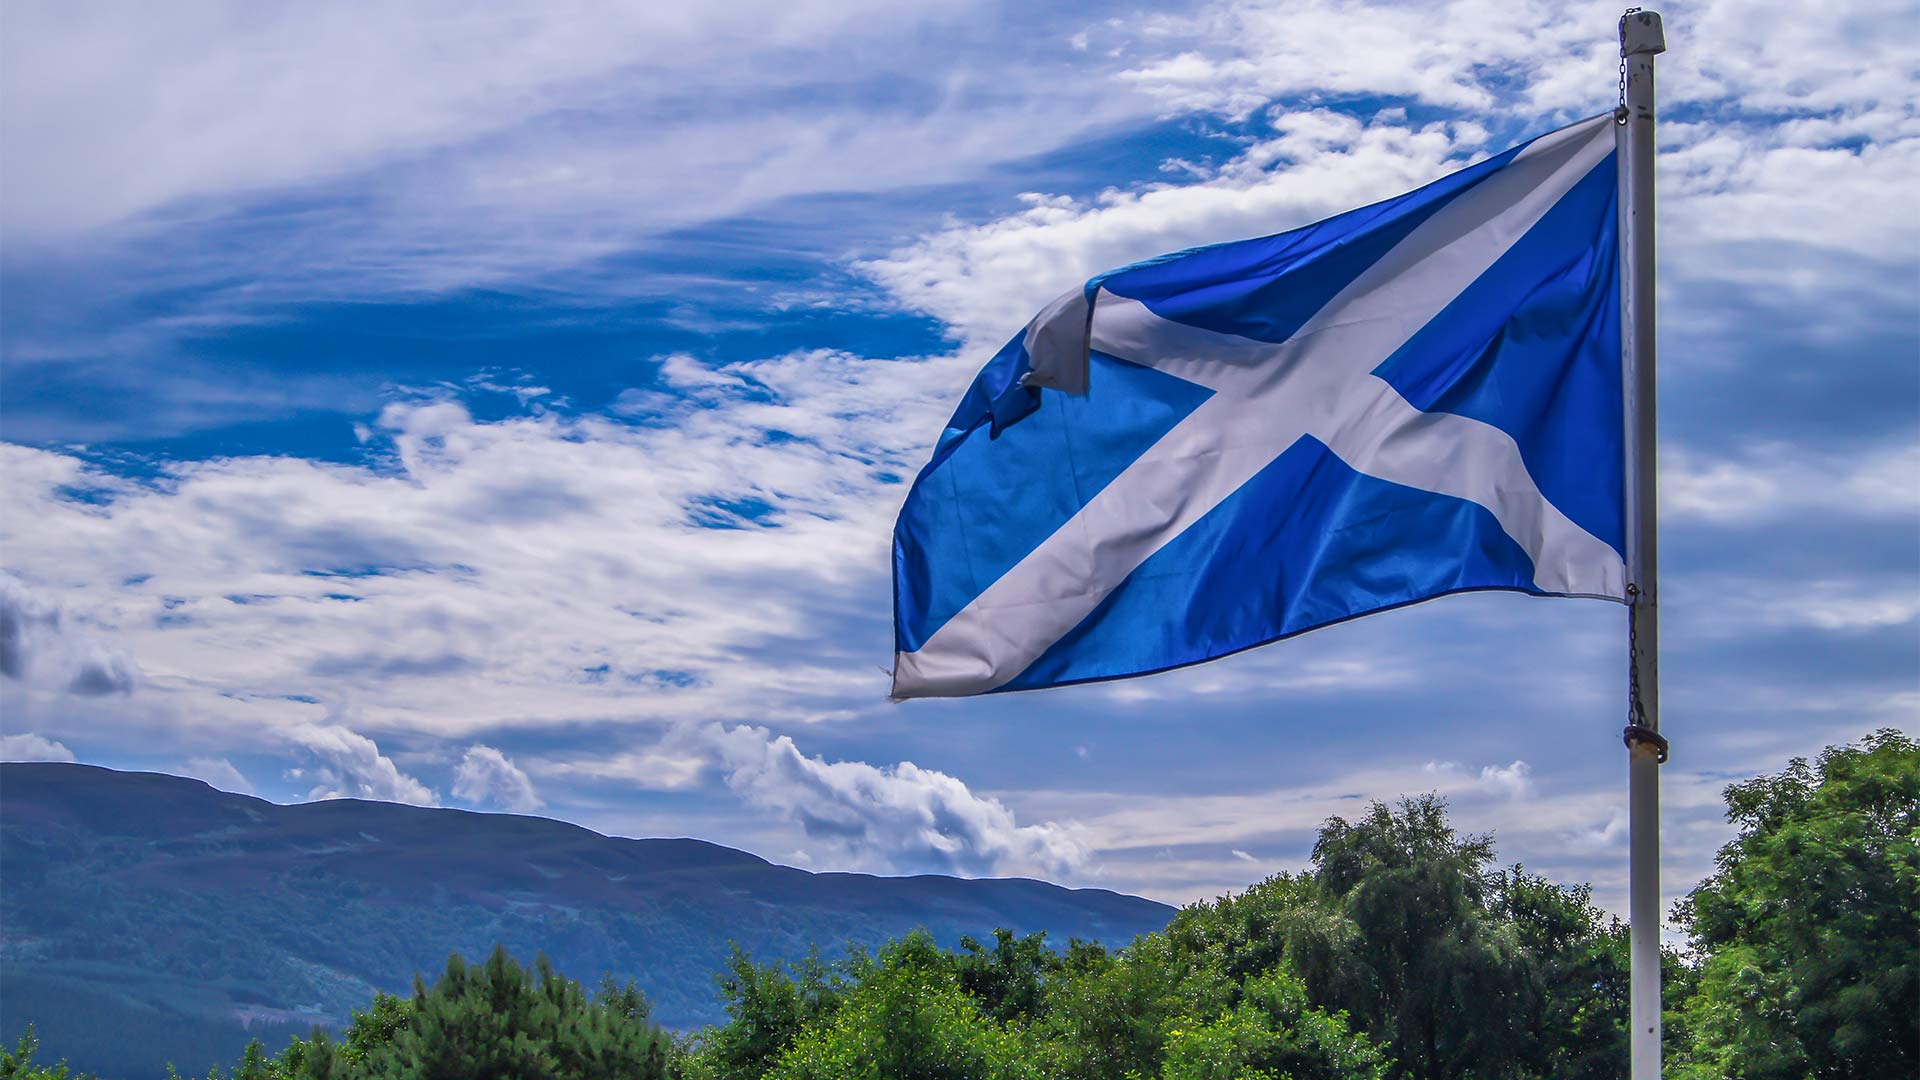 Scottish flag blowing in the wind